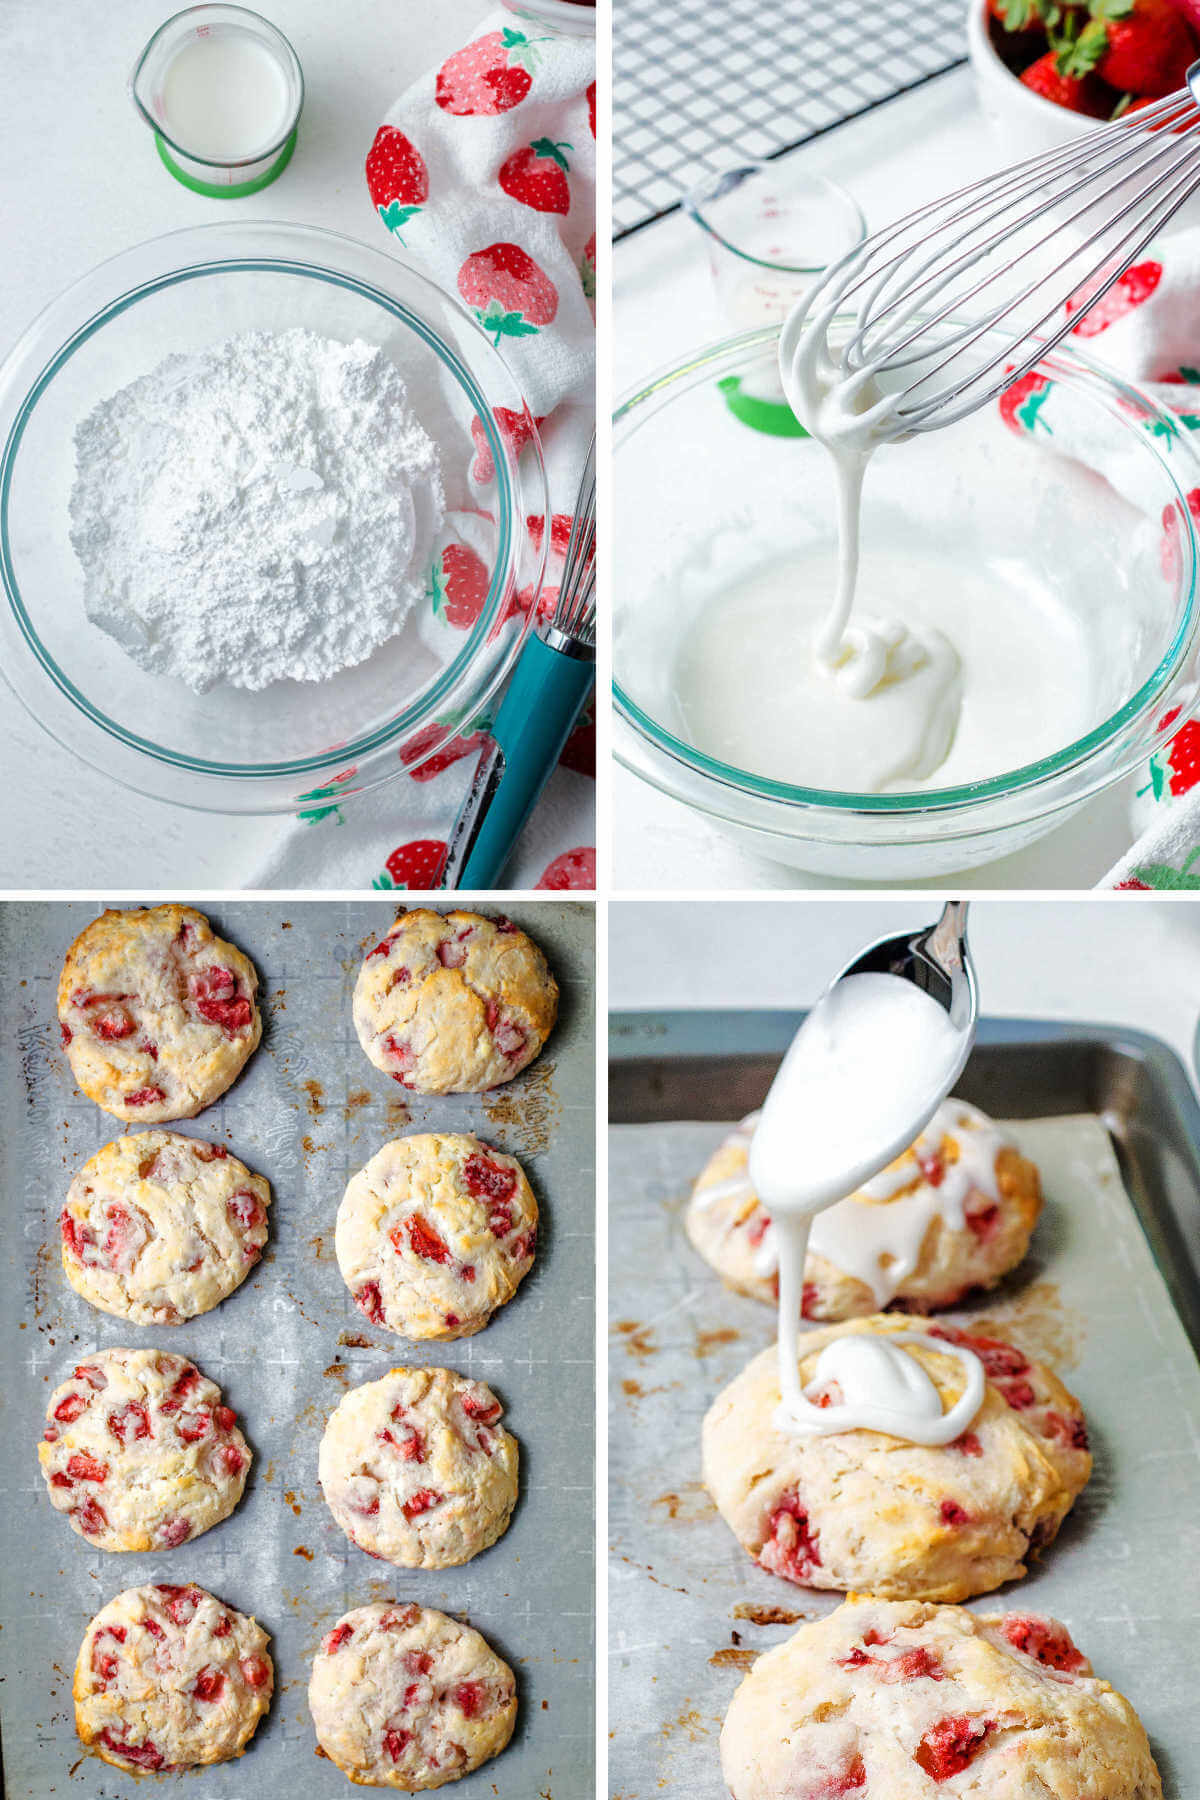 stirring together a powdered sugar glaze for strawberry biscuits and drizzling on top of warm biscuits.